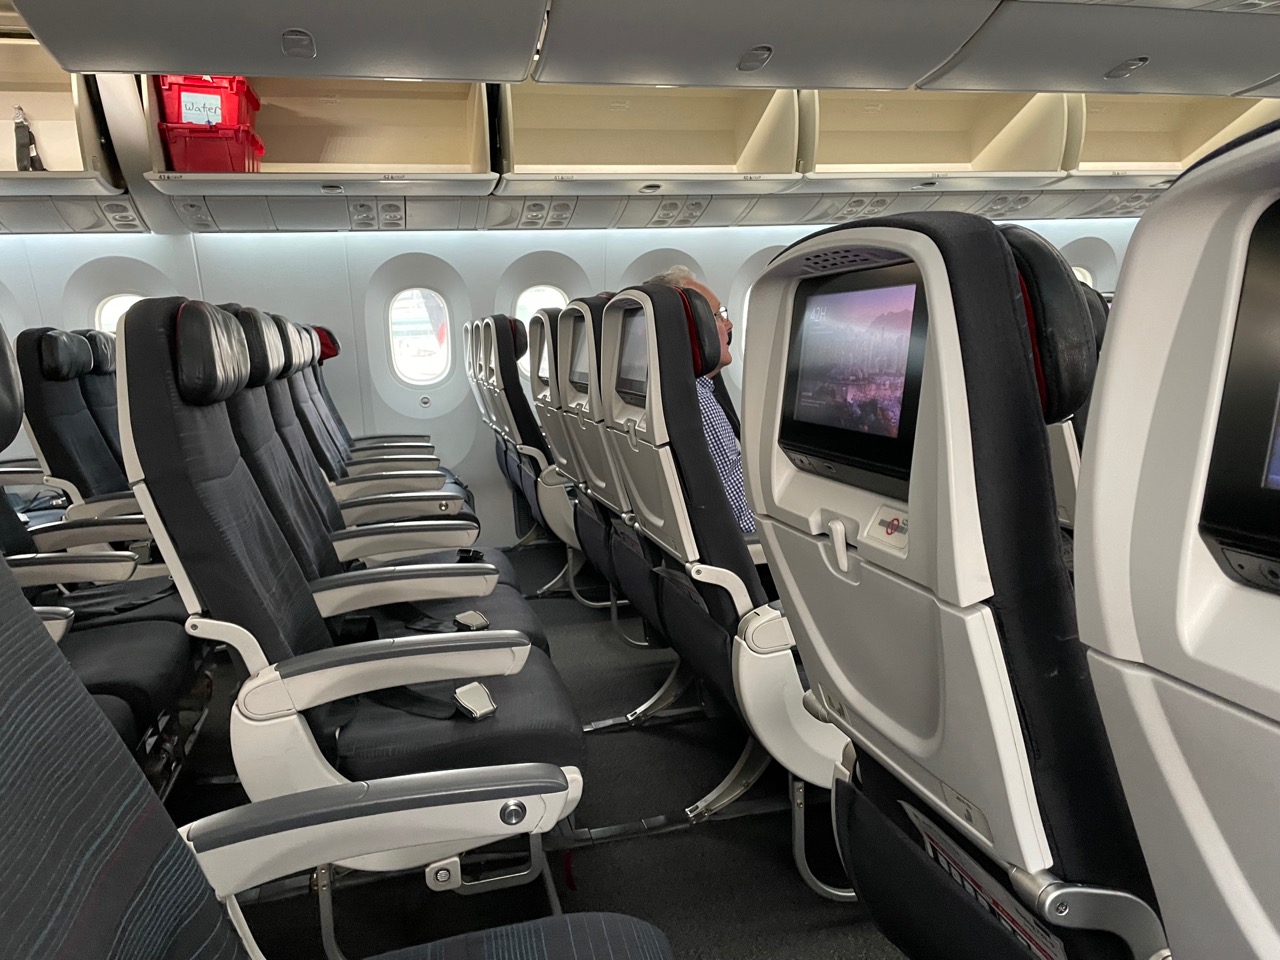 Interior picture of Air Canada 787-9 seat 42K, taken March 2022